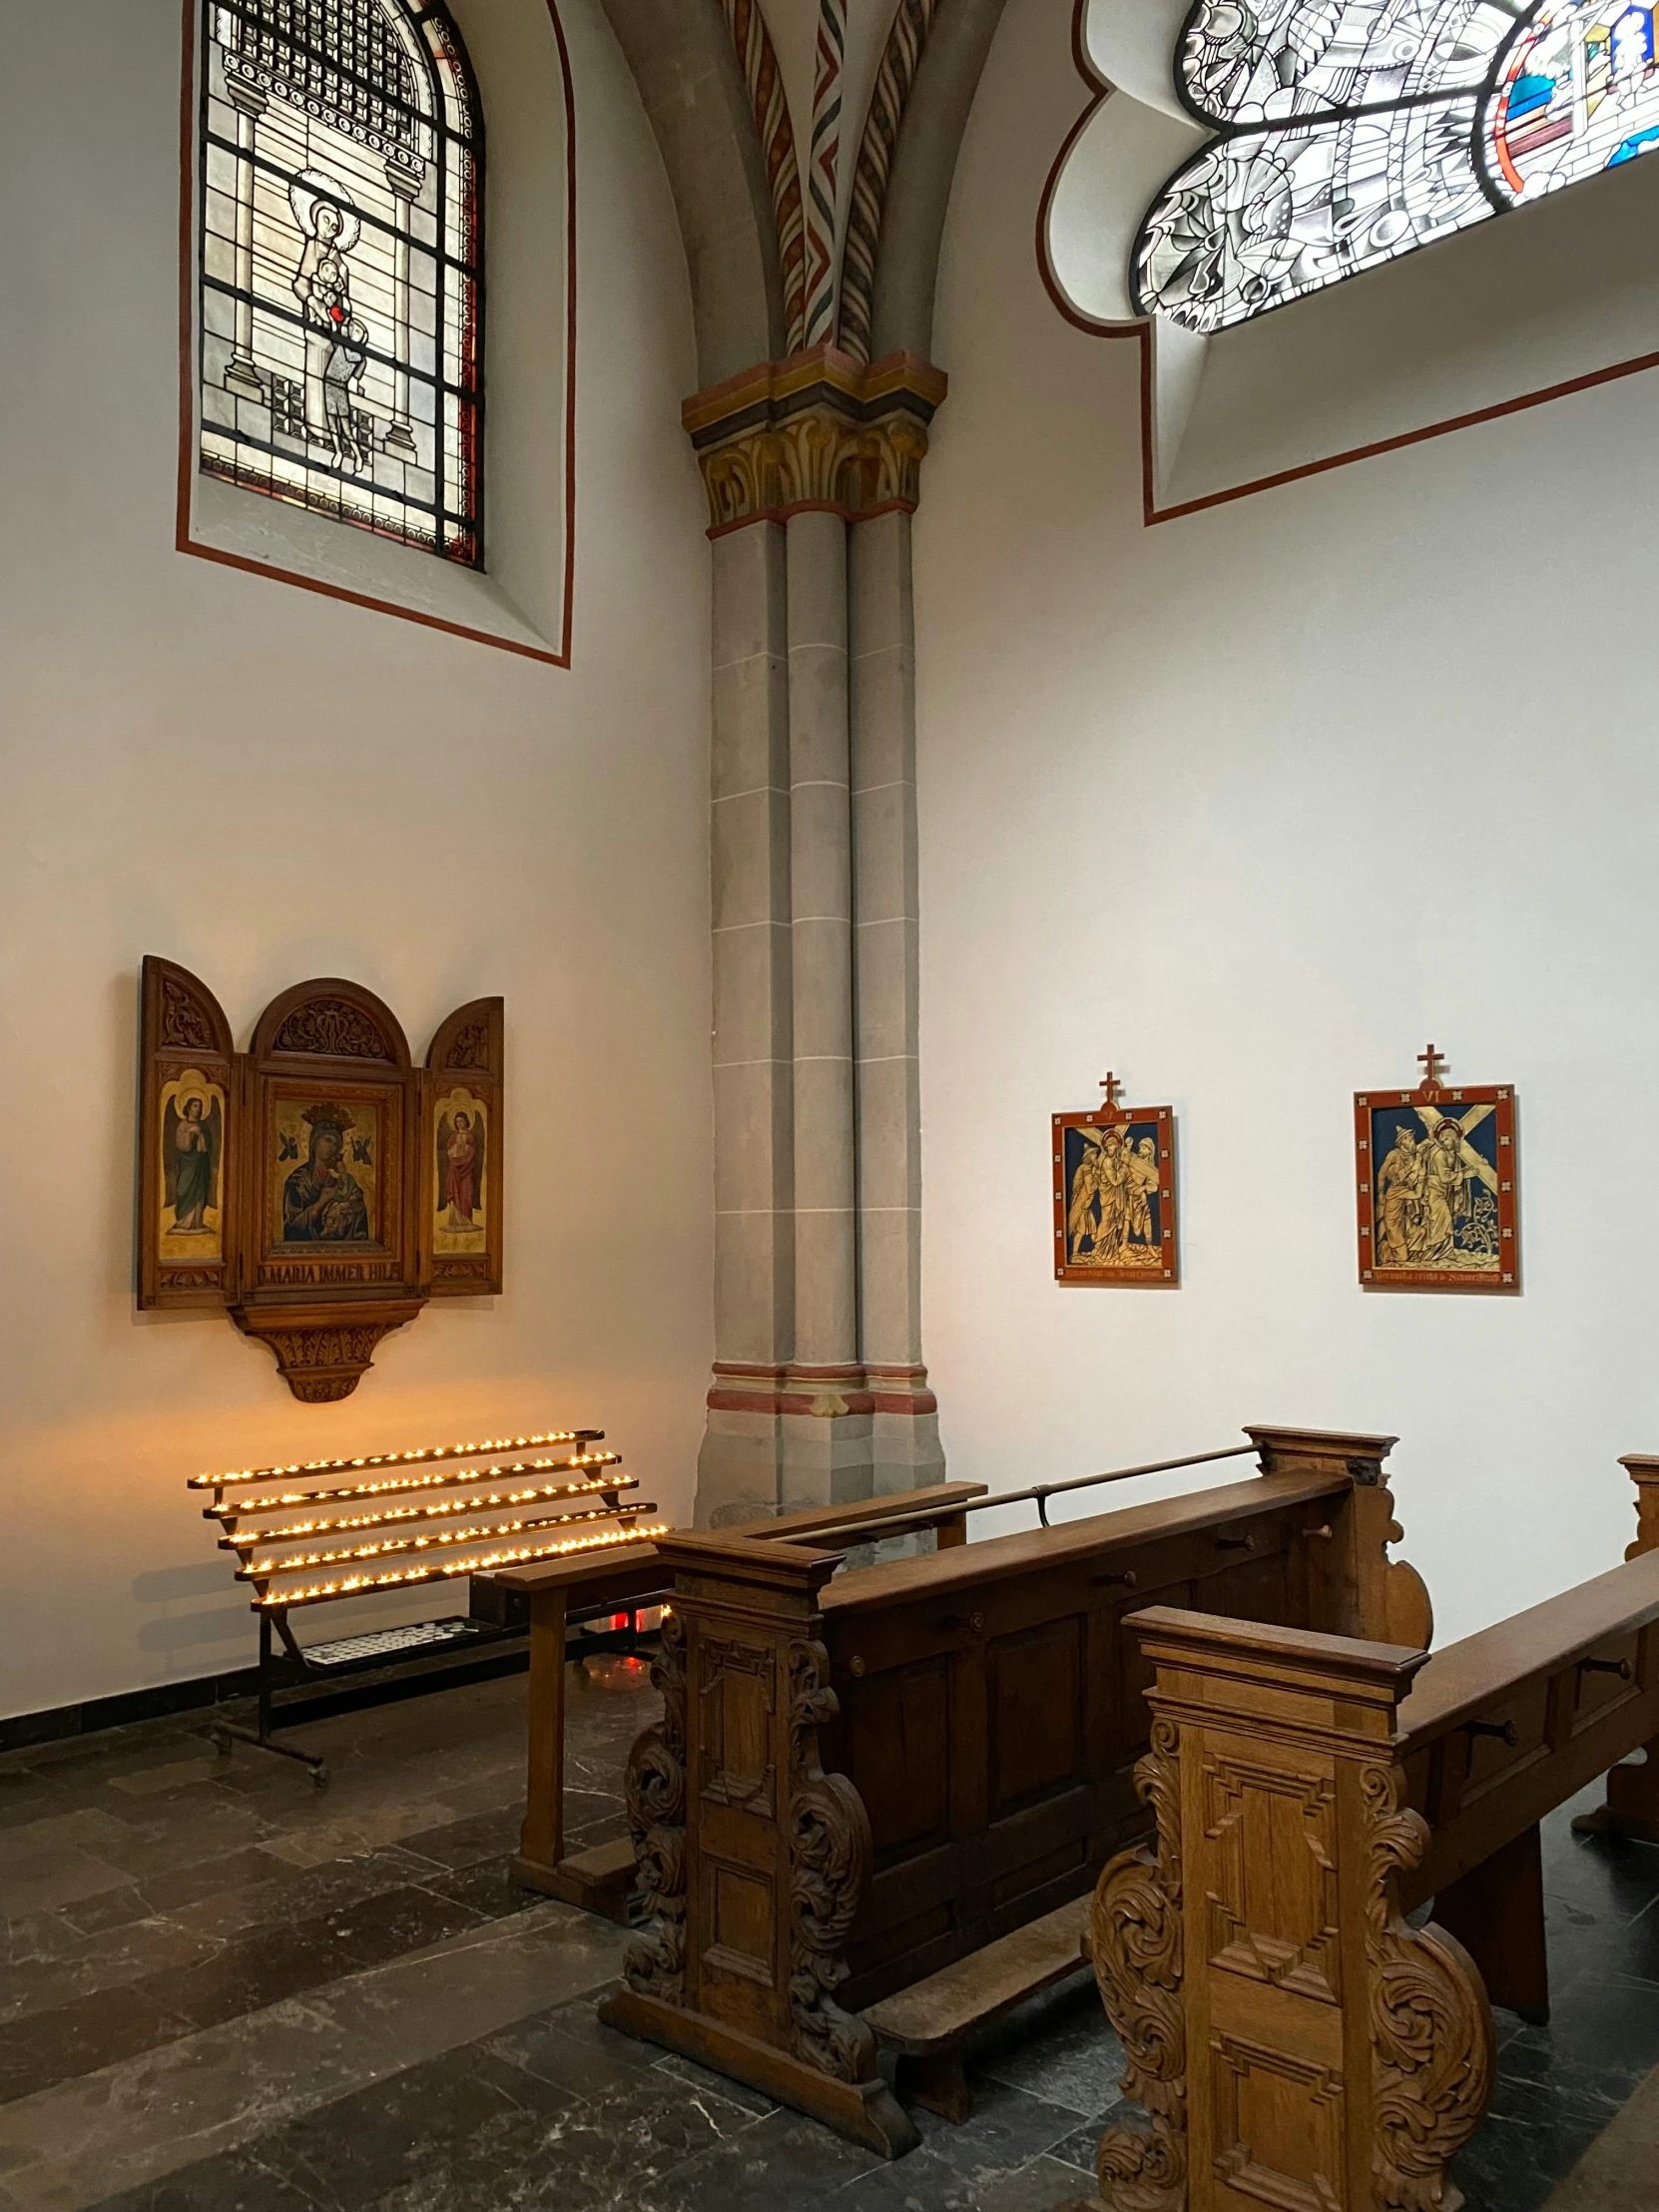 wooden benches inside of a church with stained glass windows